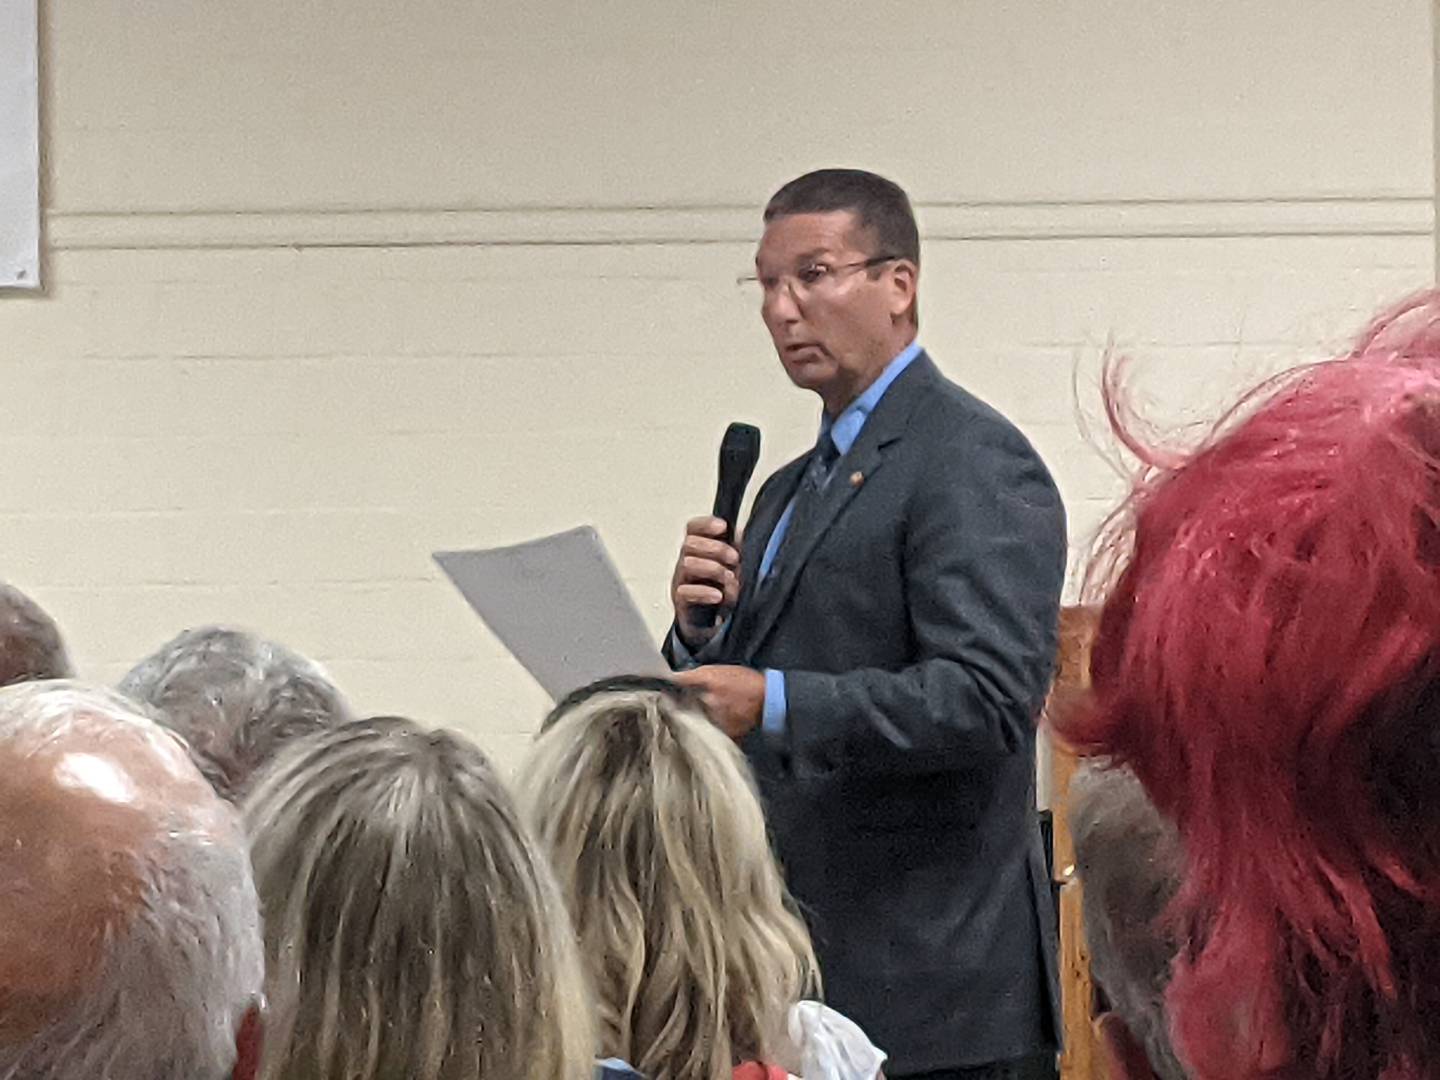 Dixon business owner Brett Nicklaus speaks during the Dixon Public Library Board meeting July 11, 2022, calling for LGBTQ comic books featuring sexual situations to not only be removed from the library but burned.